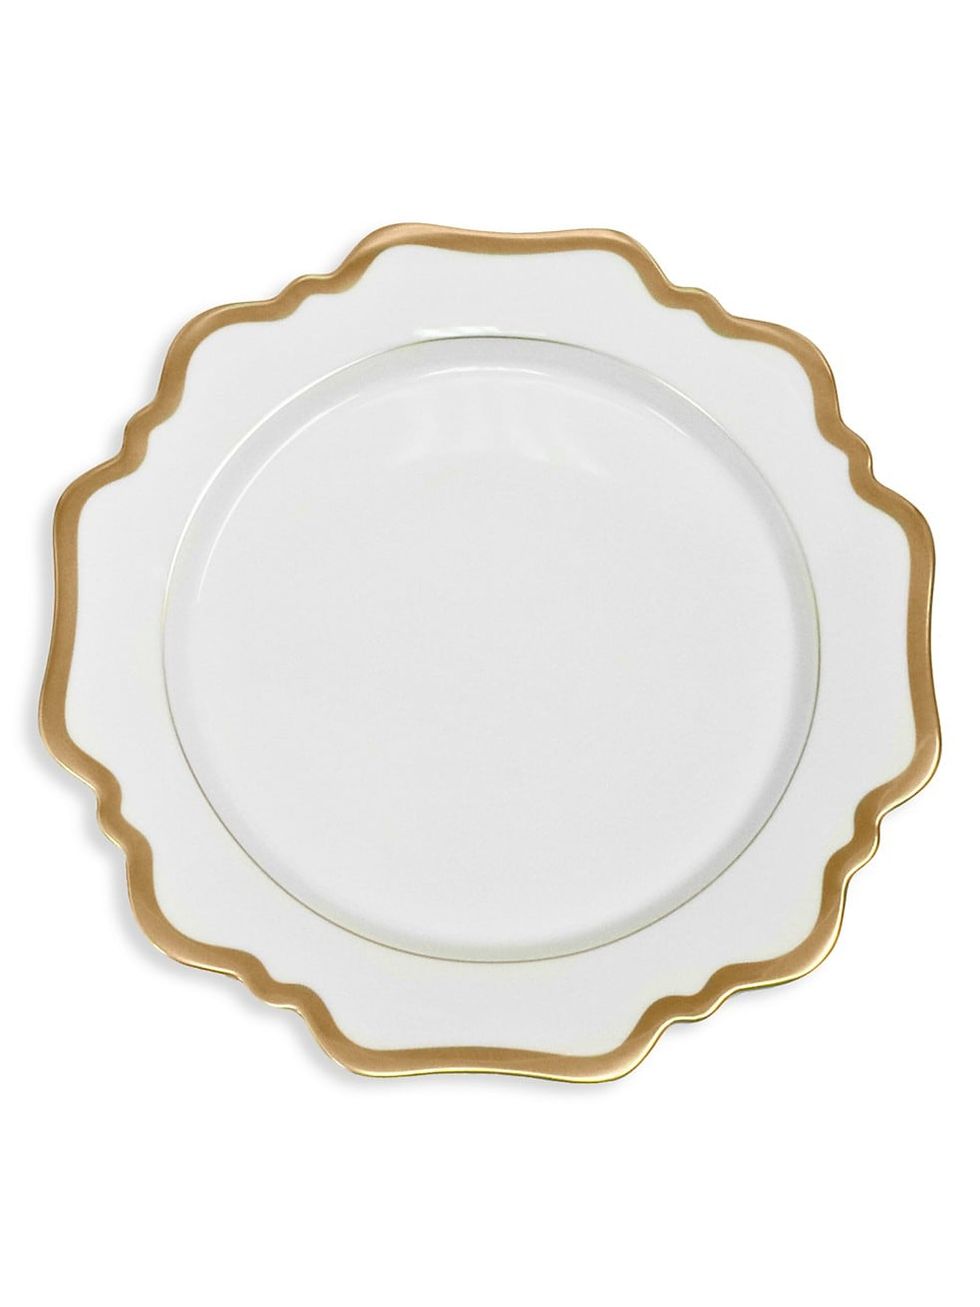 Anna's Antique-Style Dinner Plate